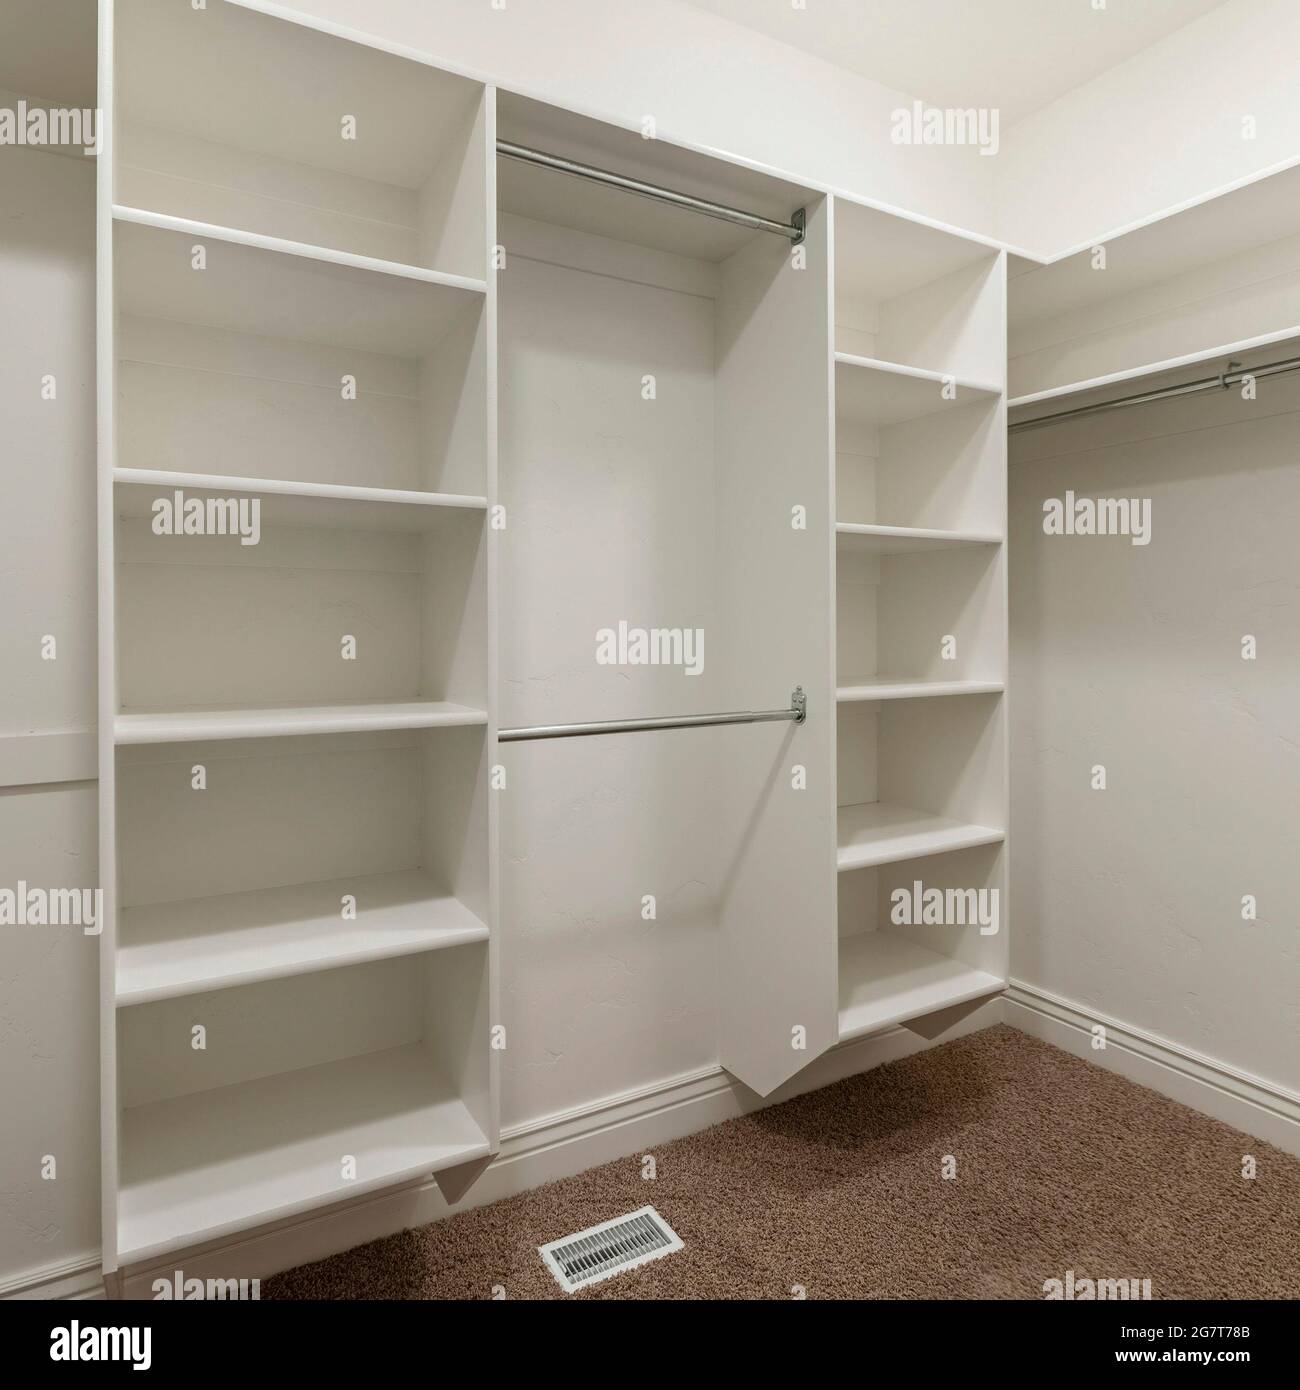 Square frame Interior of an empty walk-in closet room with floor vent Stock Photo